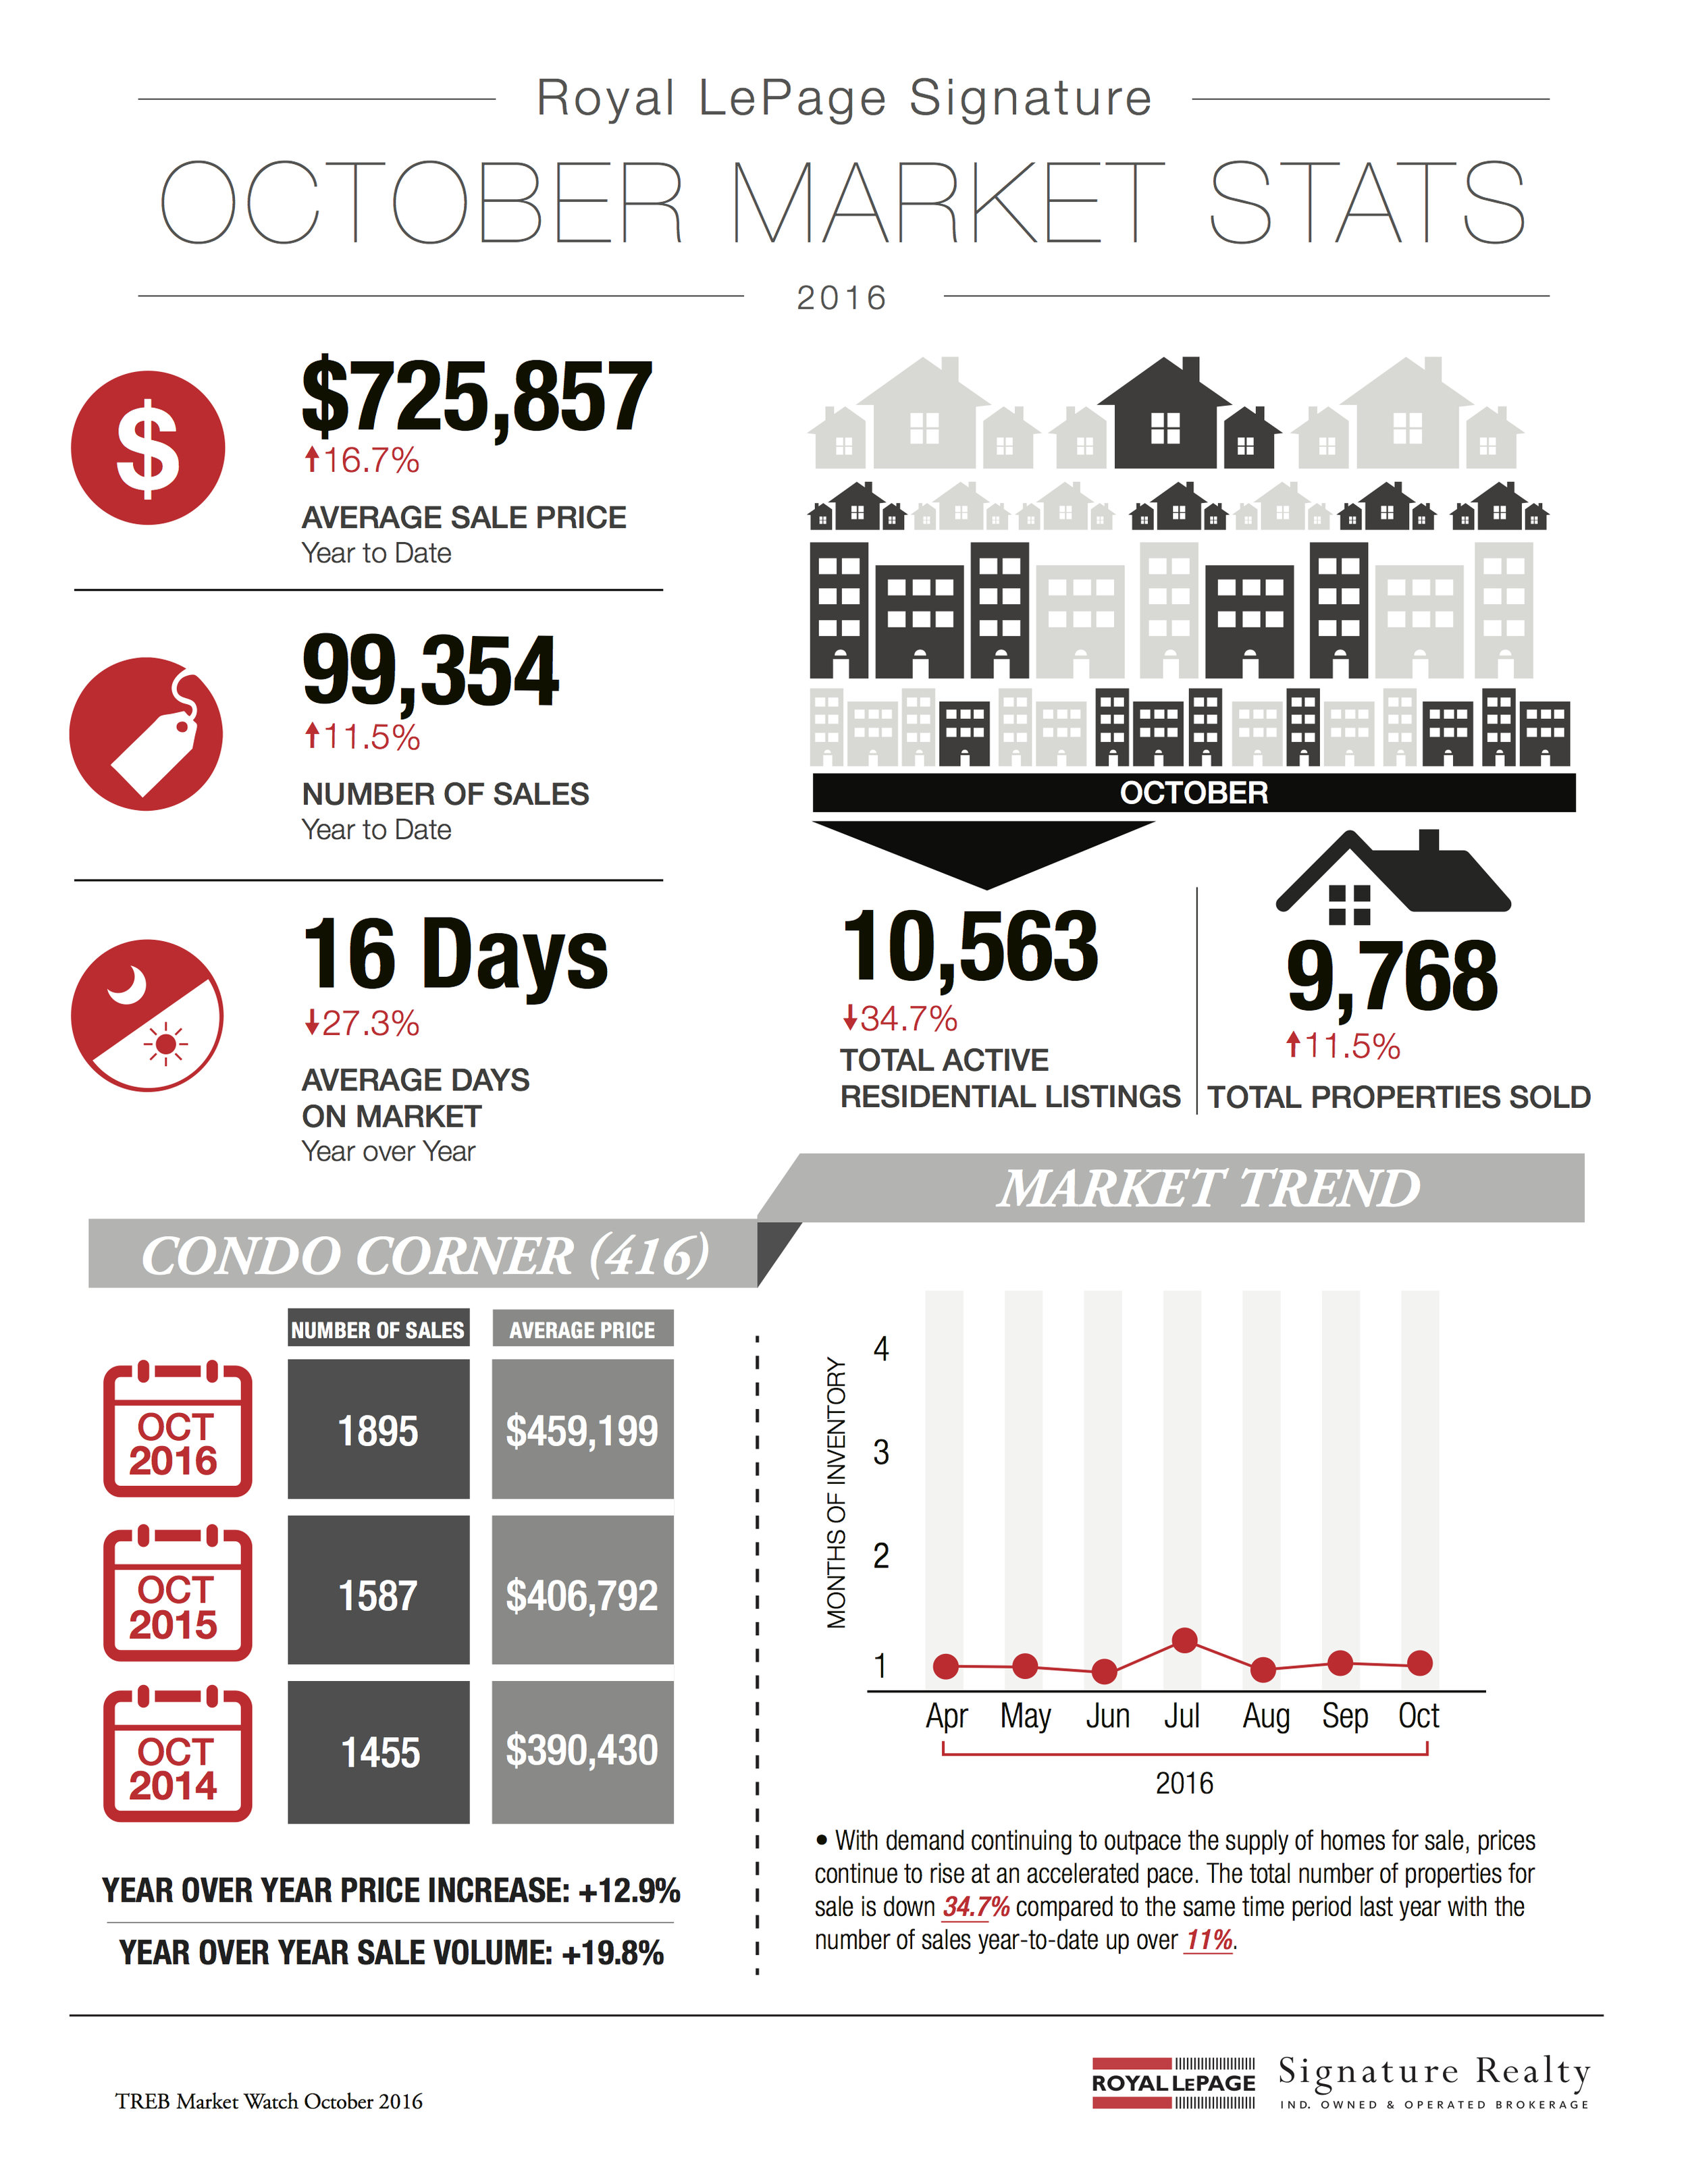 October 2016 Market Stats: Infographic & Report - Photo